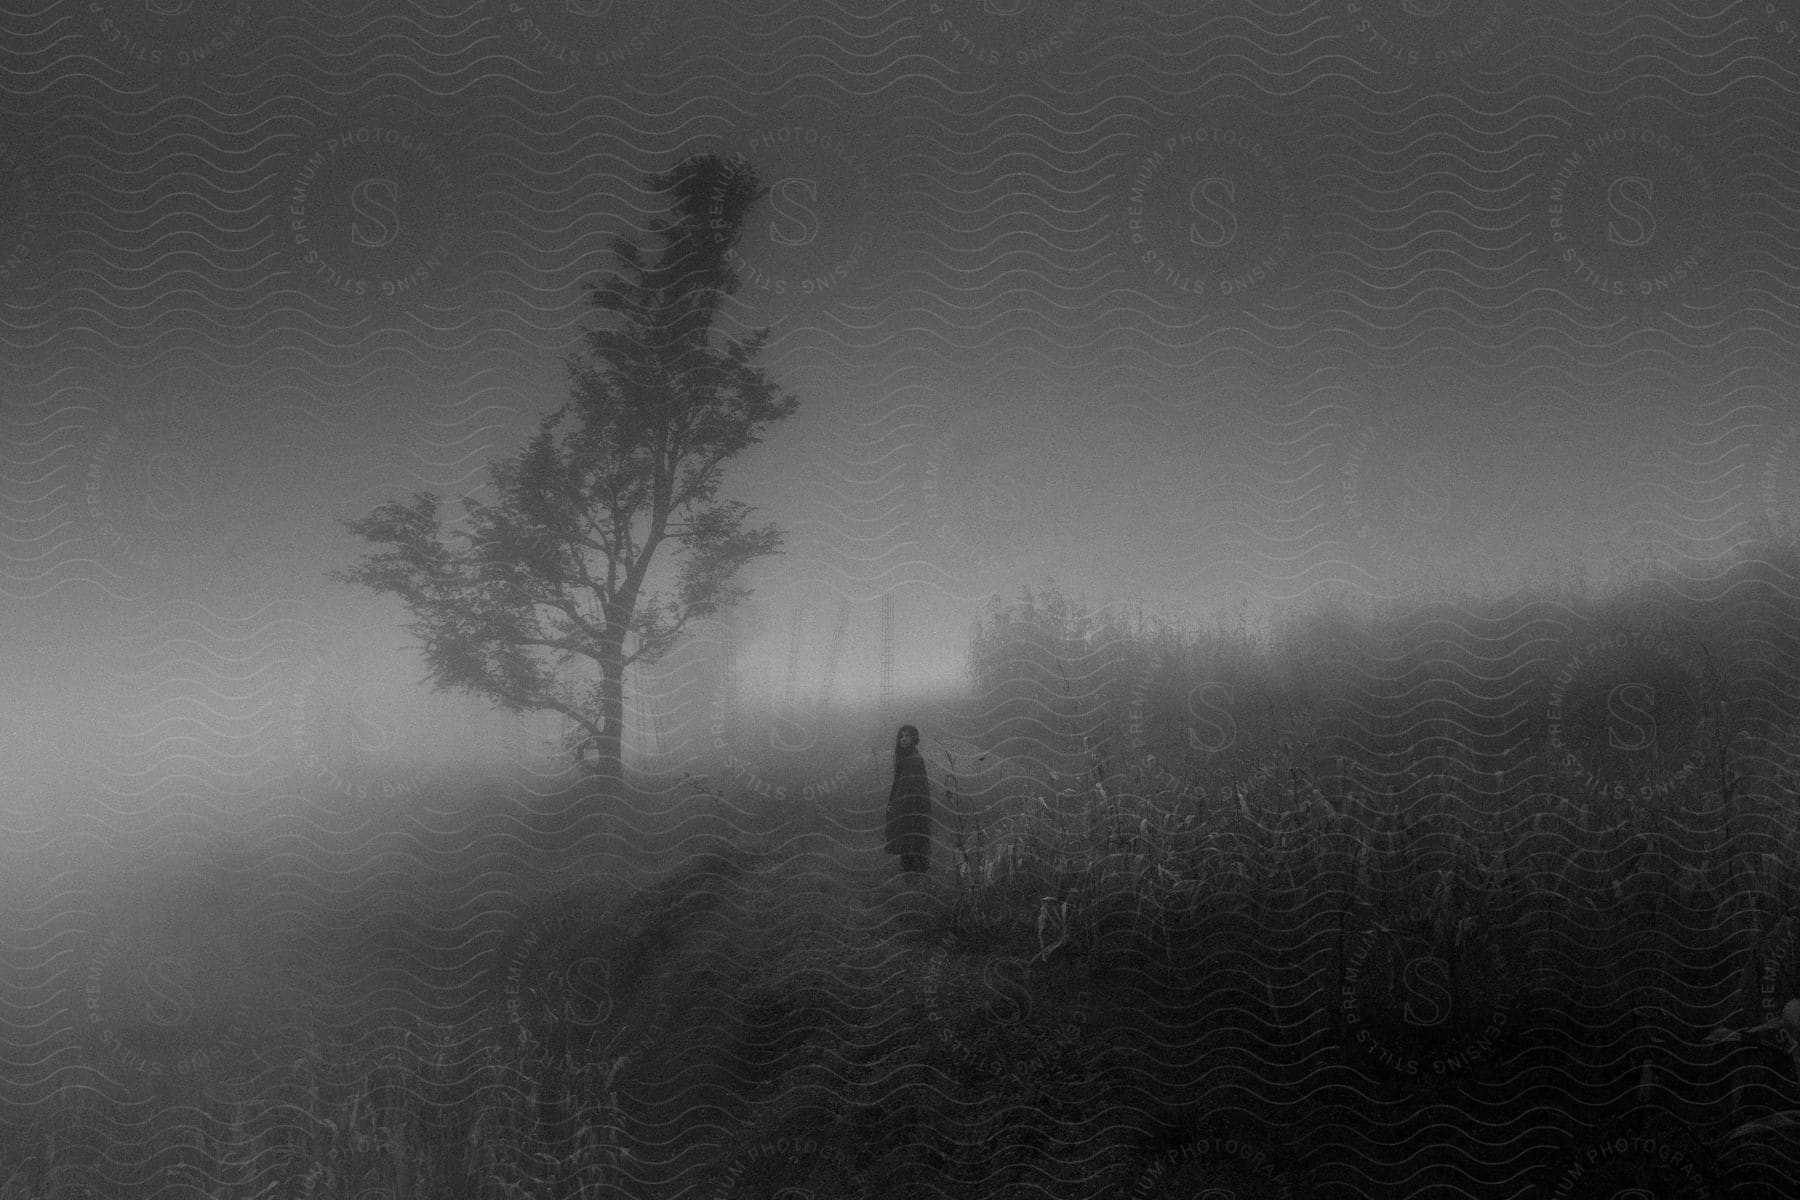 A person stands alone in a misty natural landscape